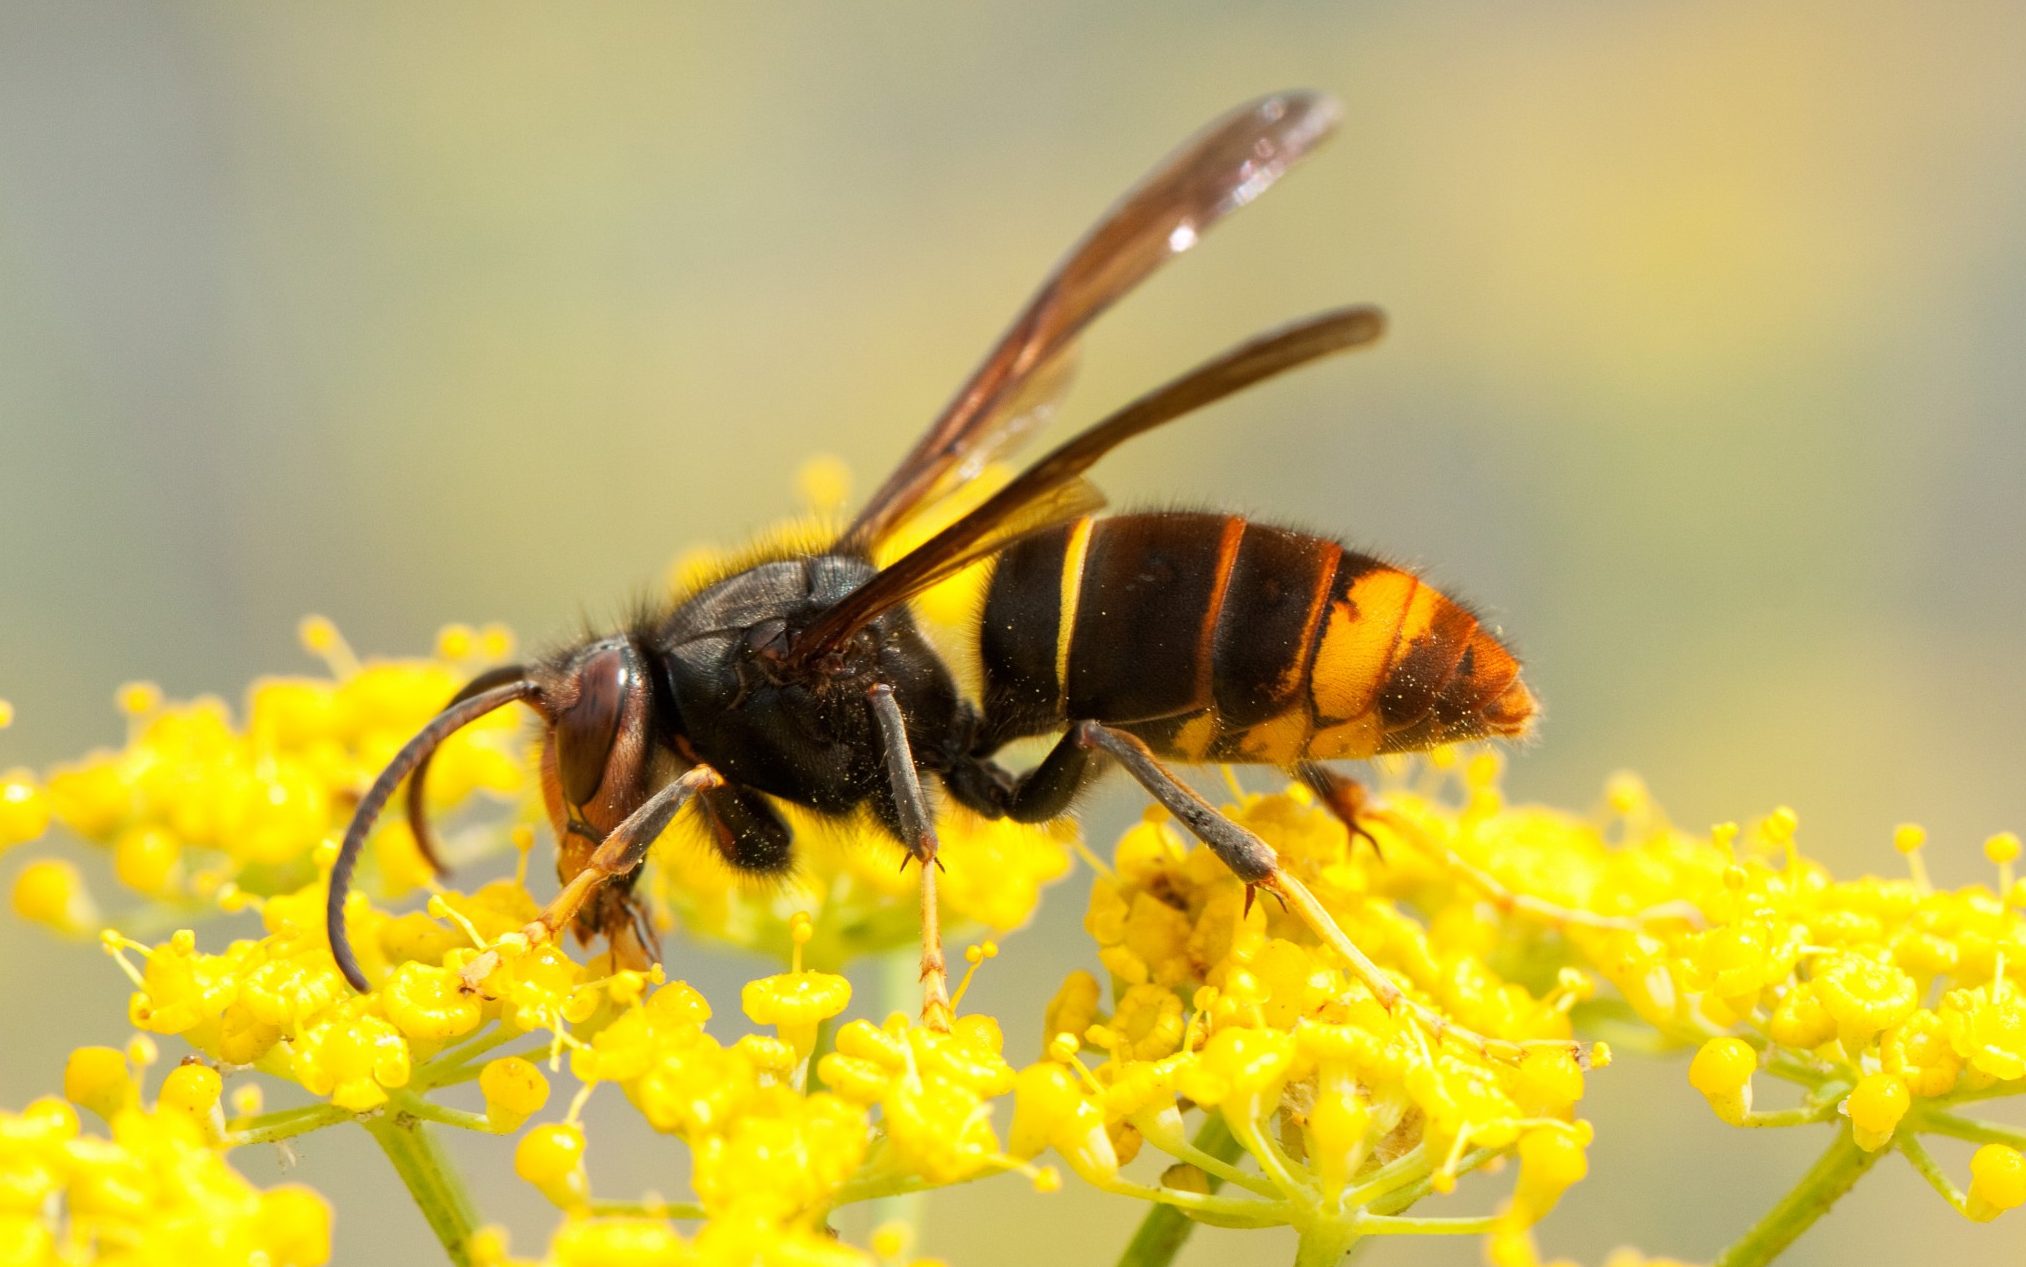 Watch out for Asian hornets — they are out to eat our British honeybees